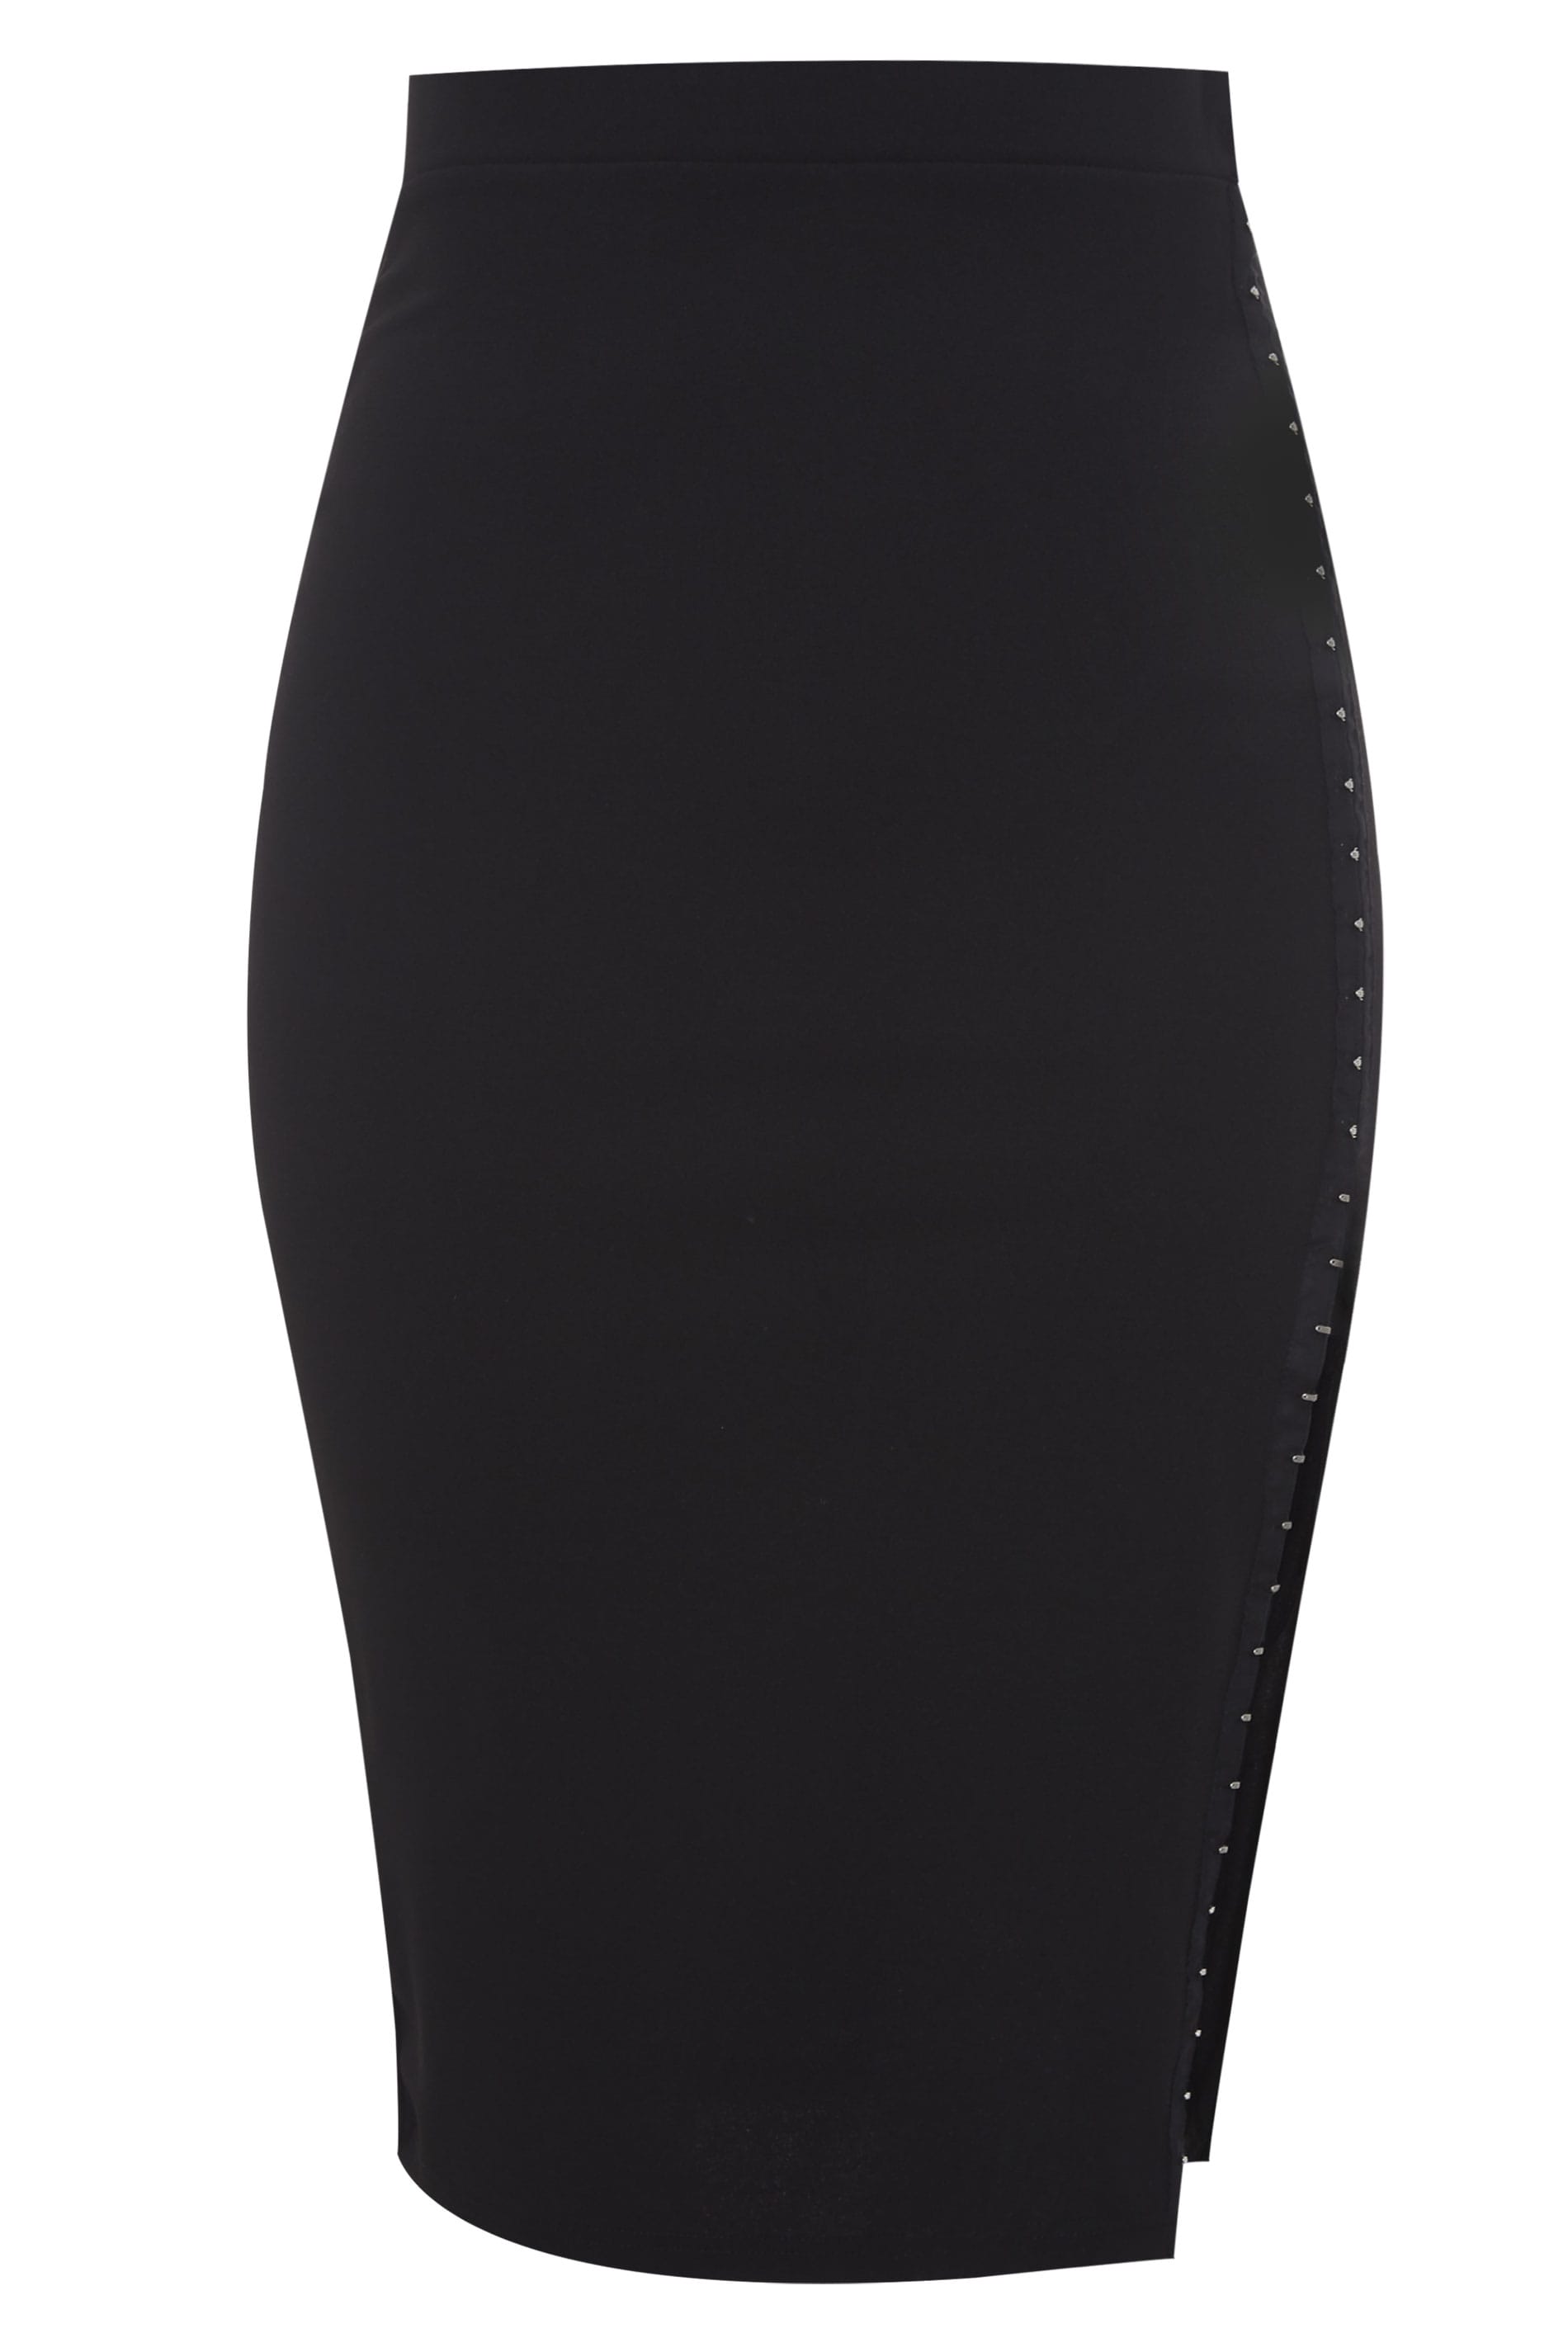 LIMITED COLLECTION Black Hook & Eye Bodycon Midi Skirt | Yours Clothing